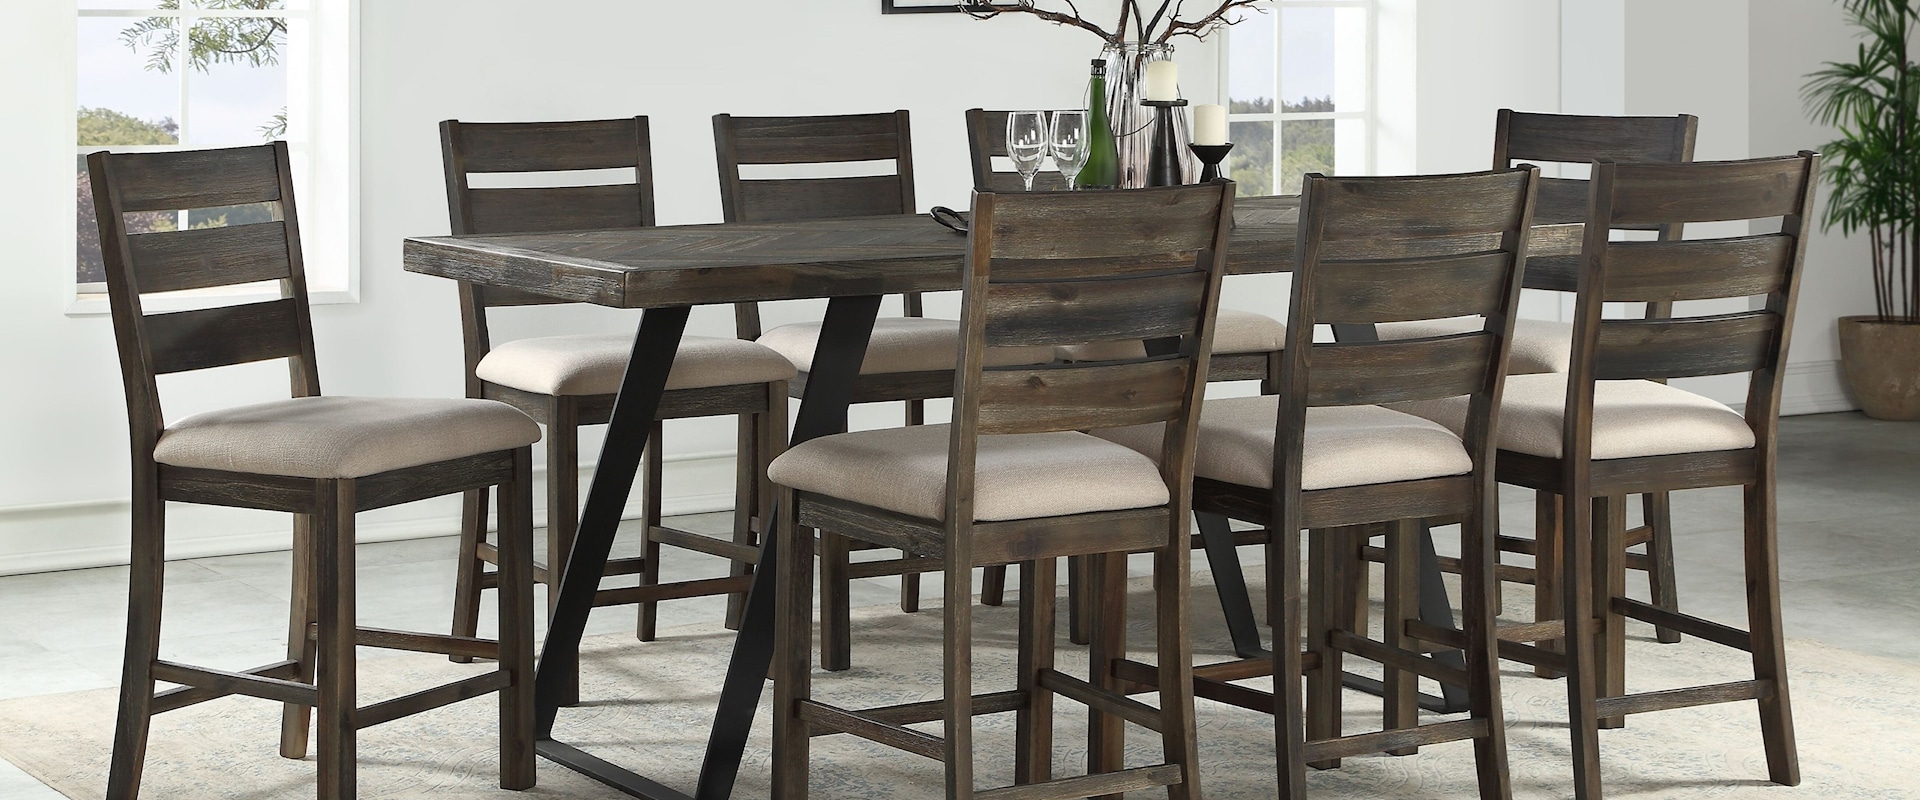 Transitional 9-Piece Counter-Height Table and Chair Set